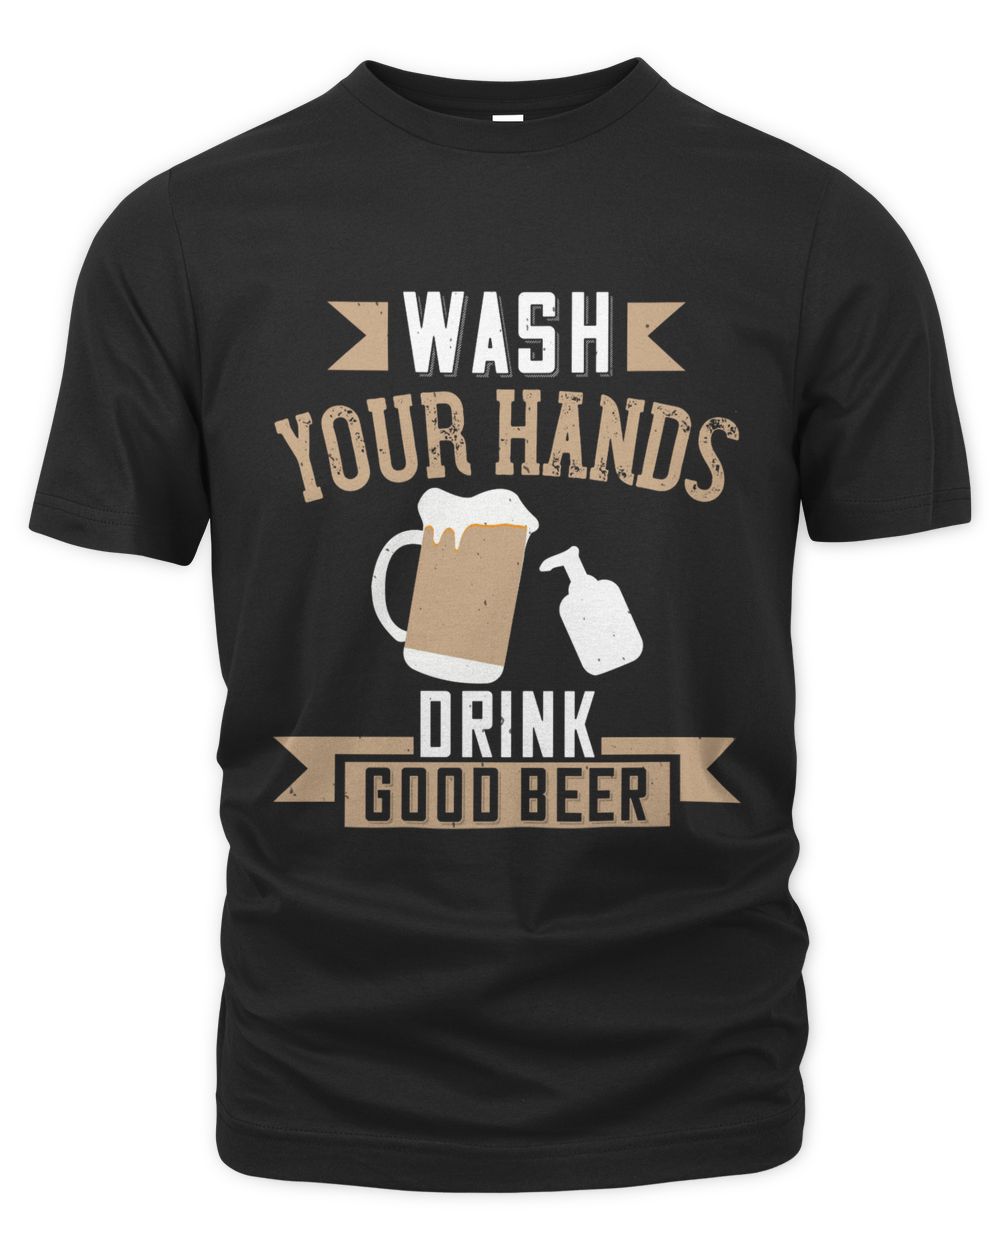 Wash Your Hands Drink Good Beer Beer Shirt For Beer Lover With Free Shipping, Great Gift For Fathers Day Men's Premium Tshirt black 